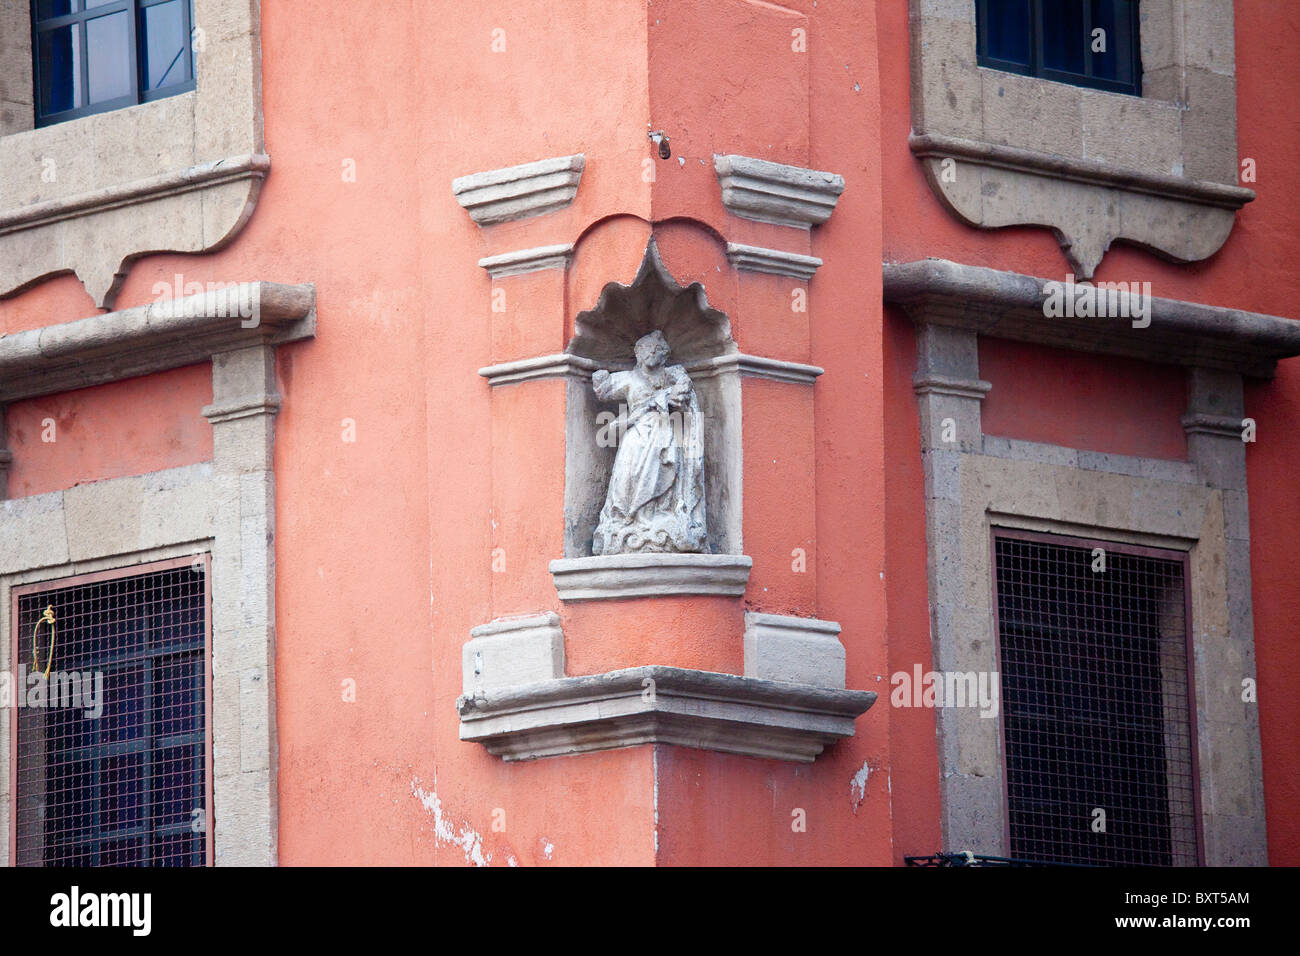 Architectural detail in Mexico City, Mexico Stock Photo